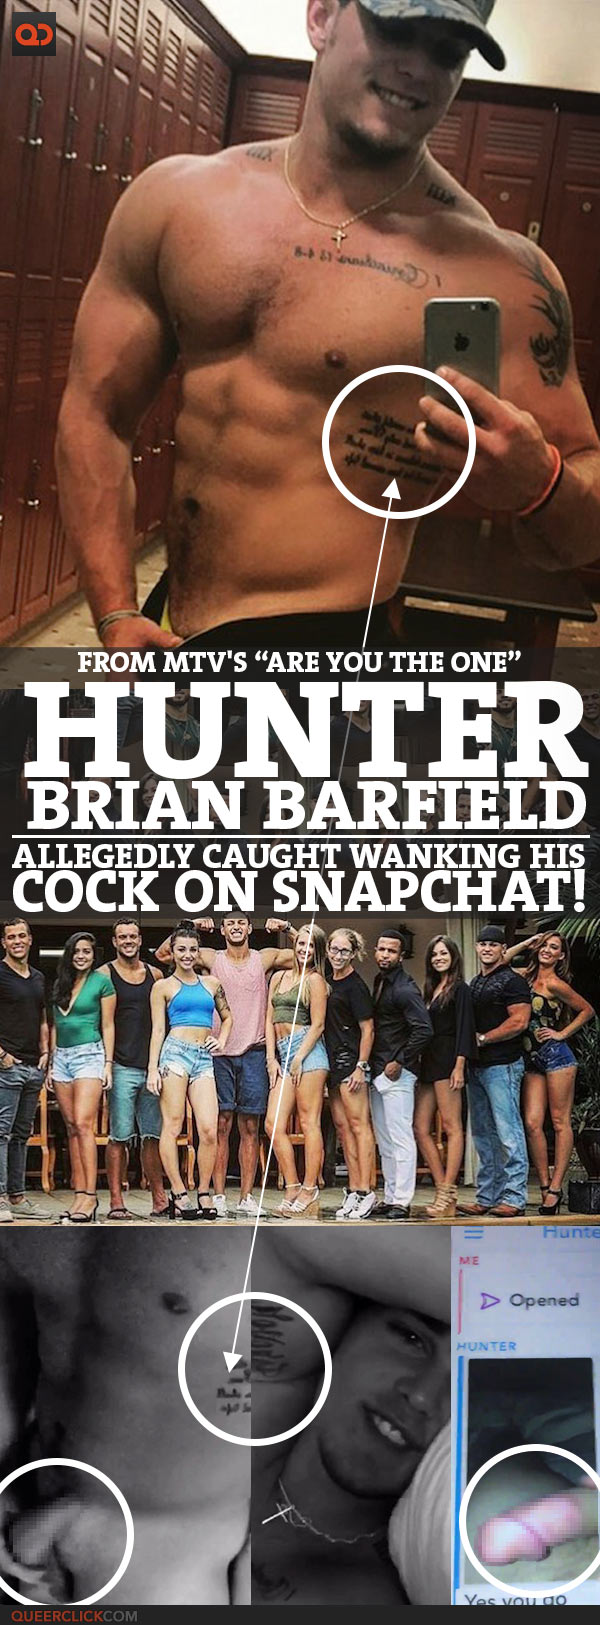 Hunter Brian Barfield, From MTV's “Are You The One”, Allegedly Caught Wanking His Cock On Snapchat!